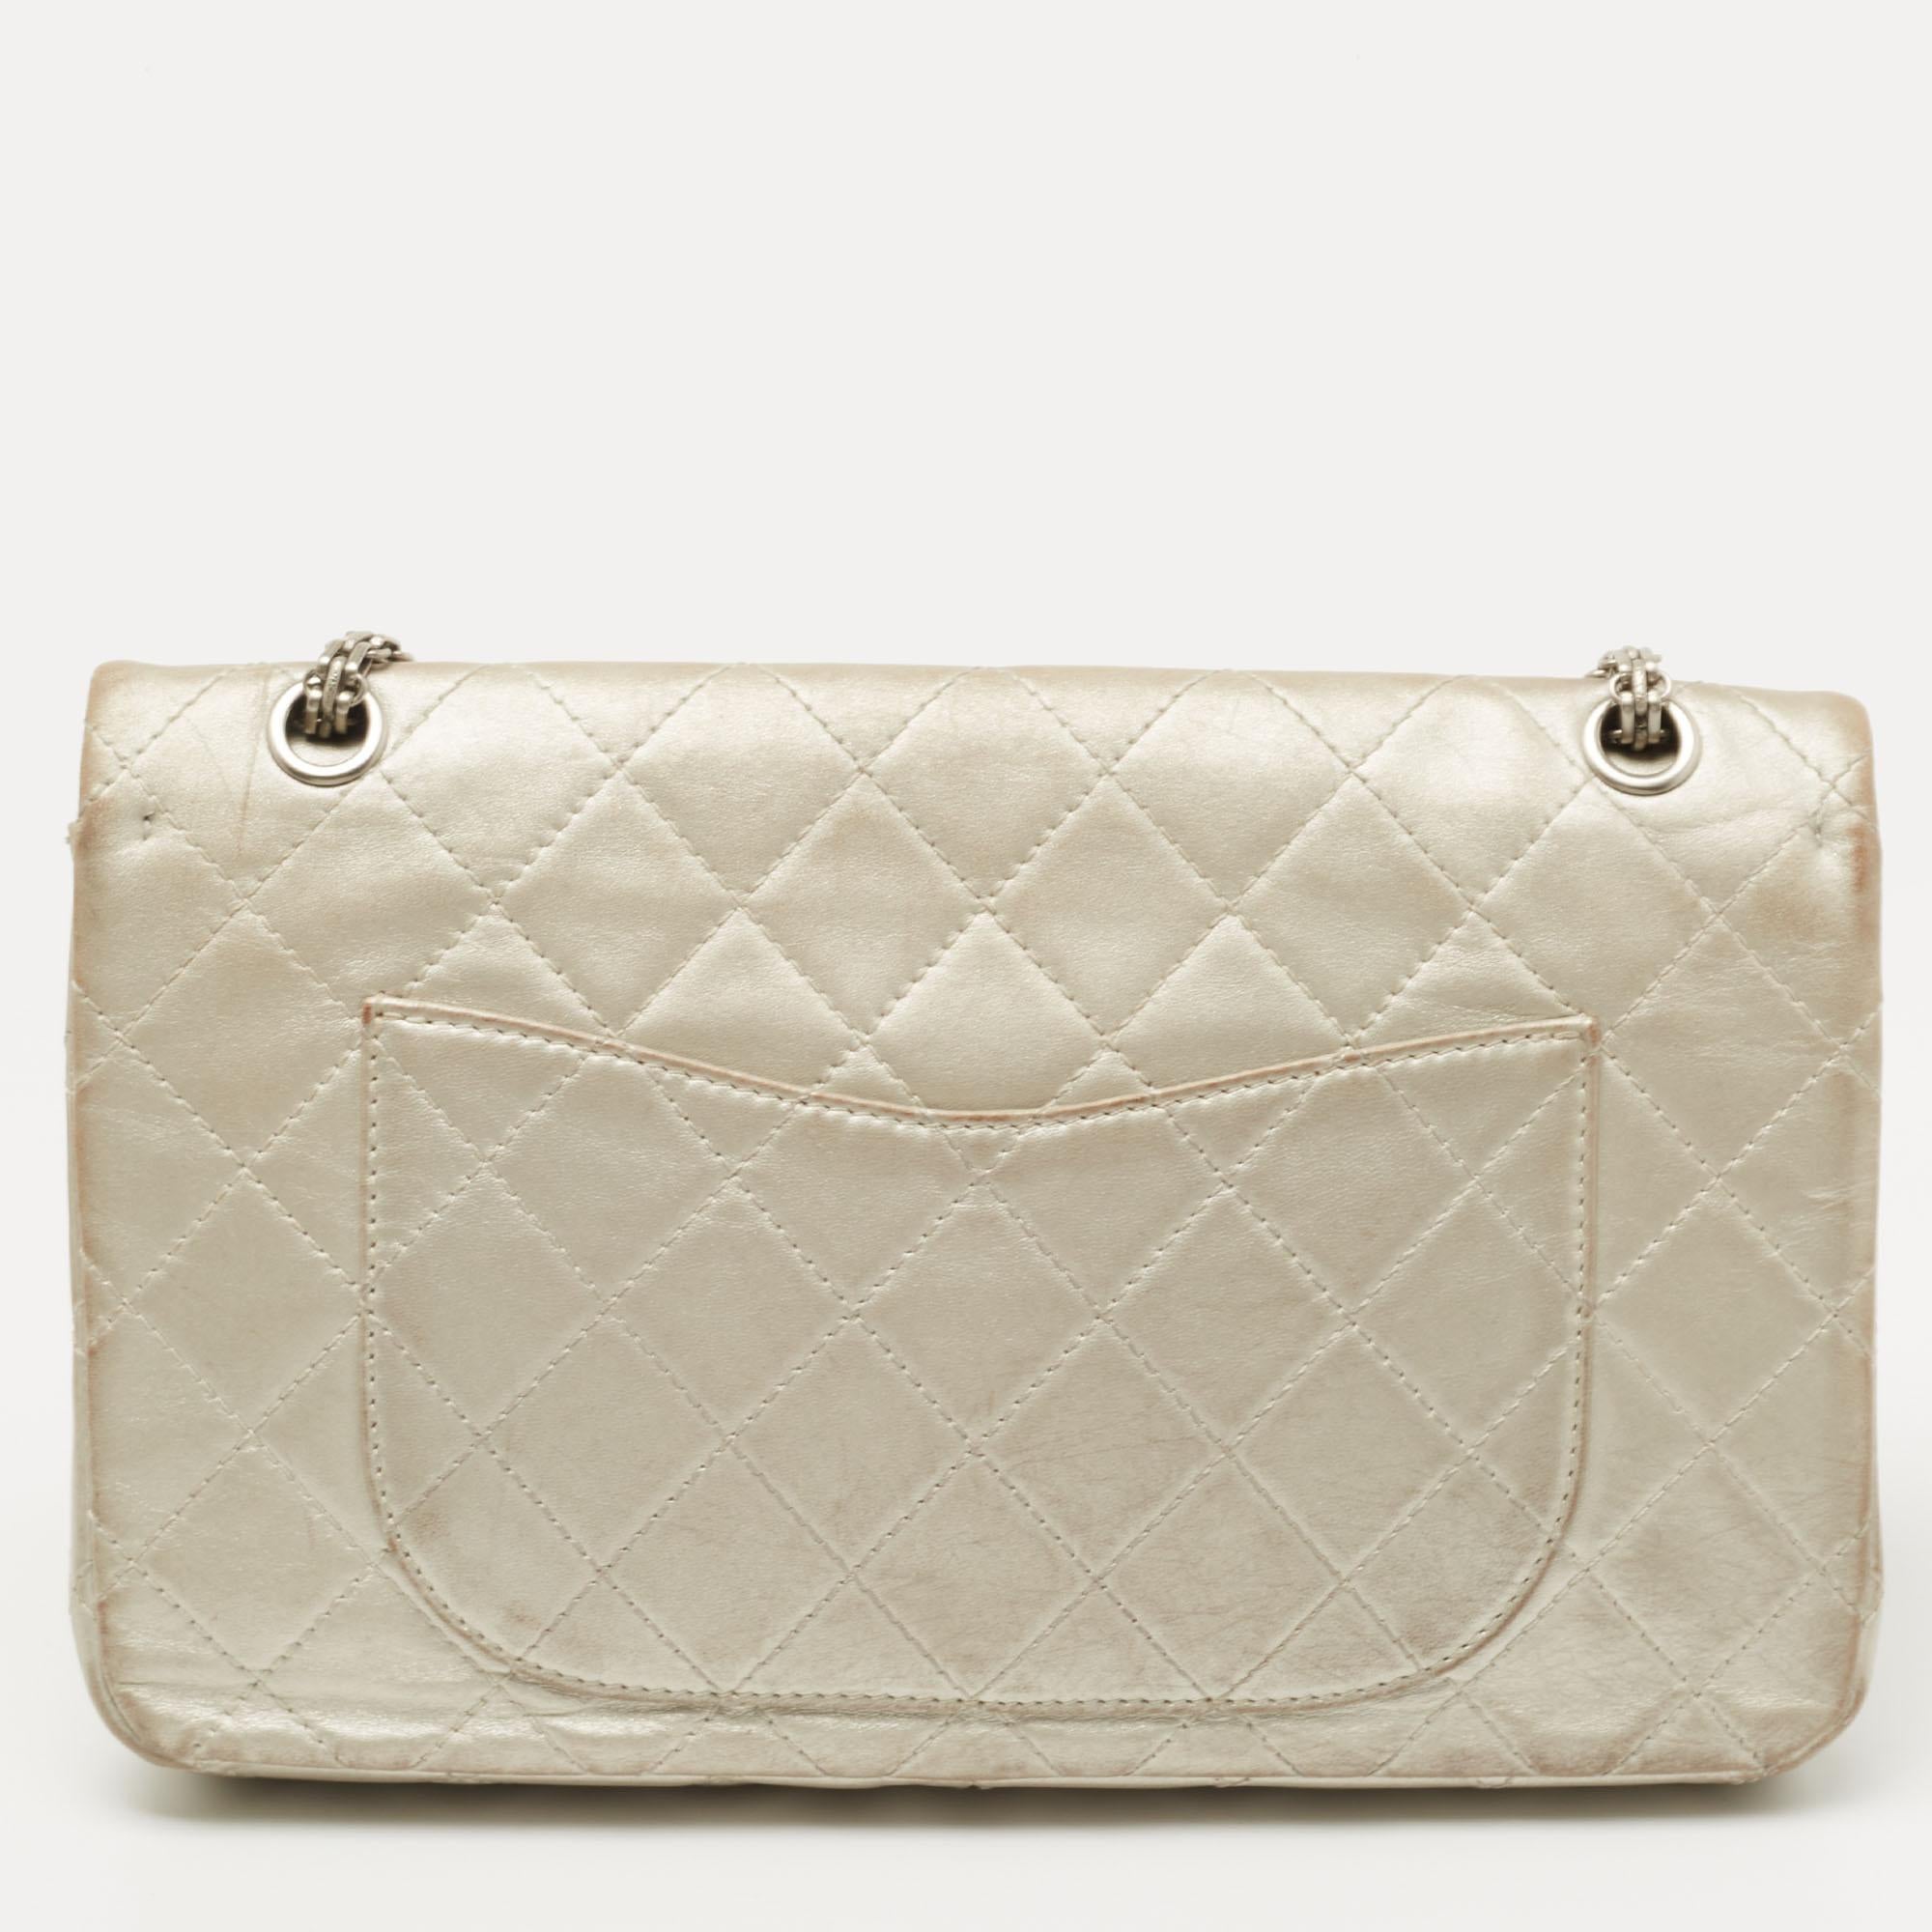 Chanel Silver Quilted Leather 227 Reissue 2.55 Flap Bag 1